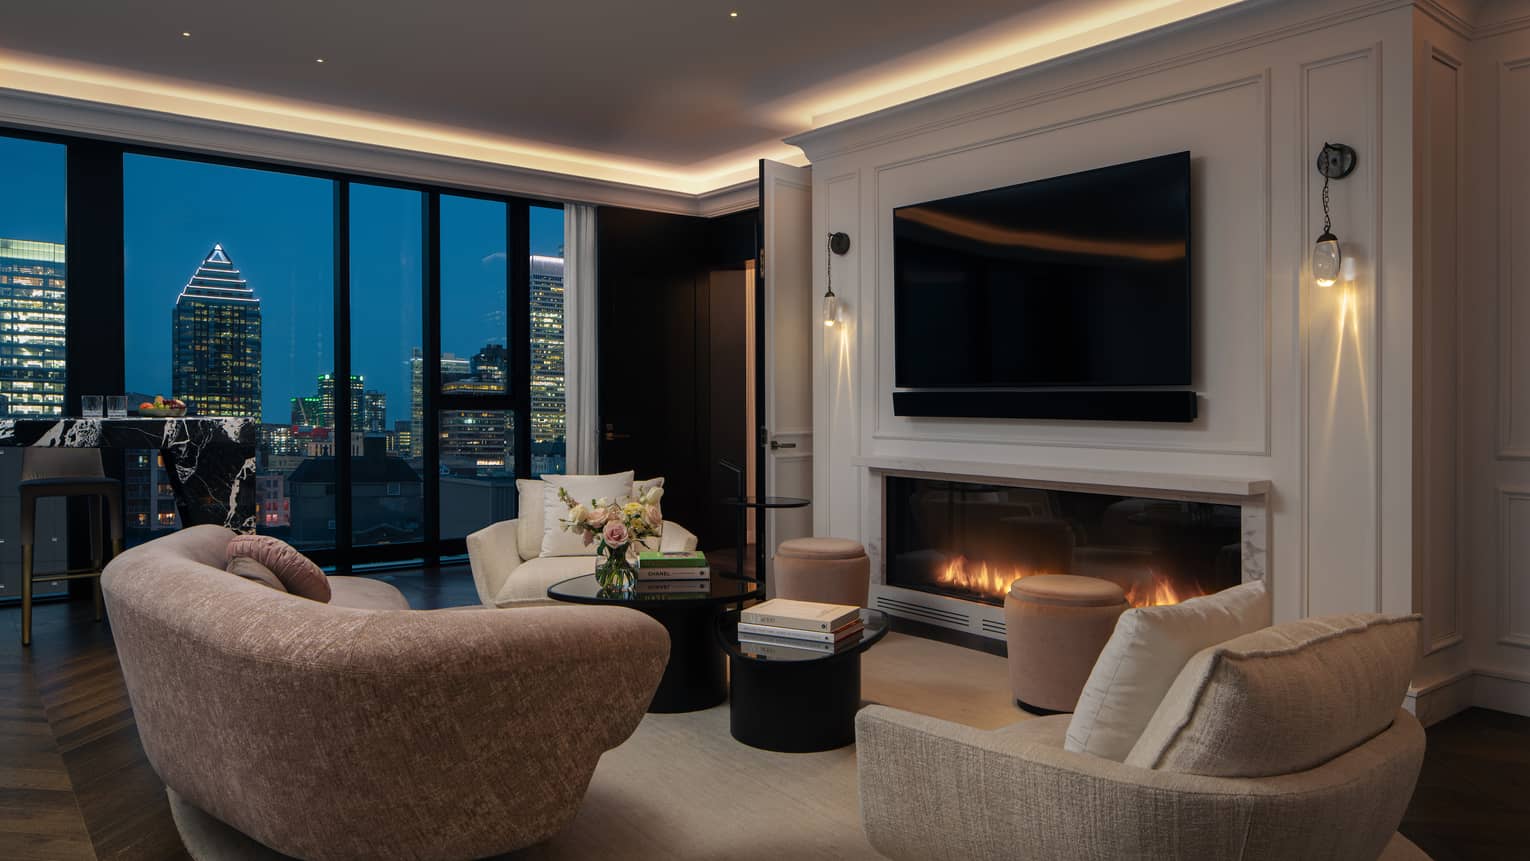 Living room with modern curved sofa and chairs, fireplace, TV and city evening view